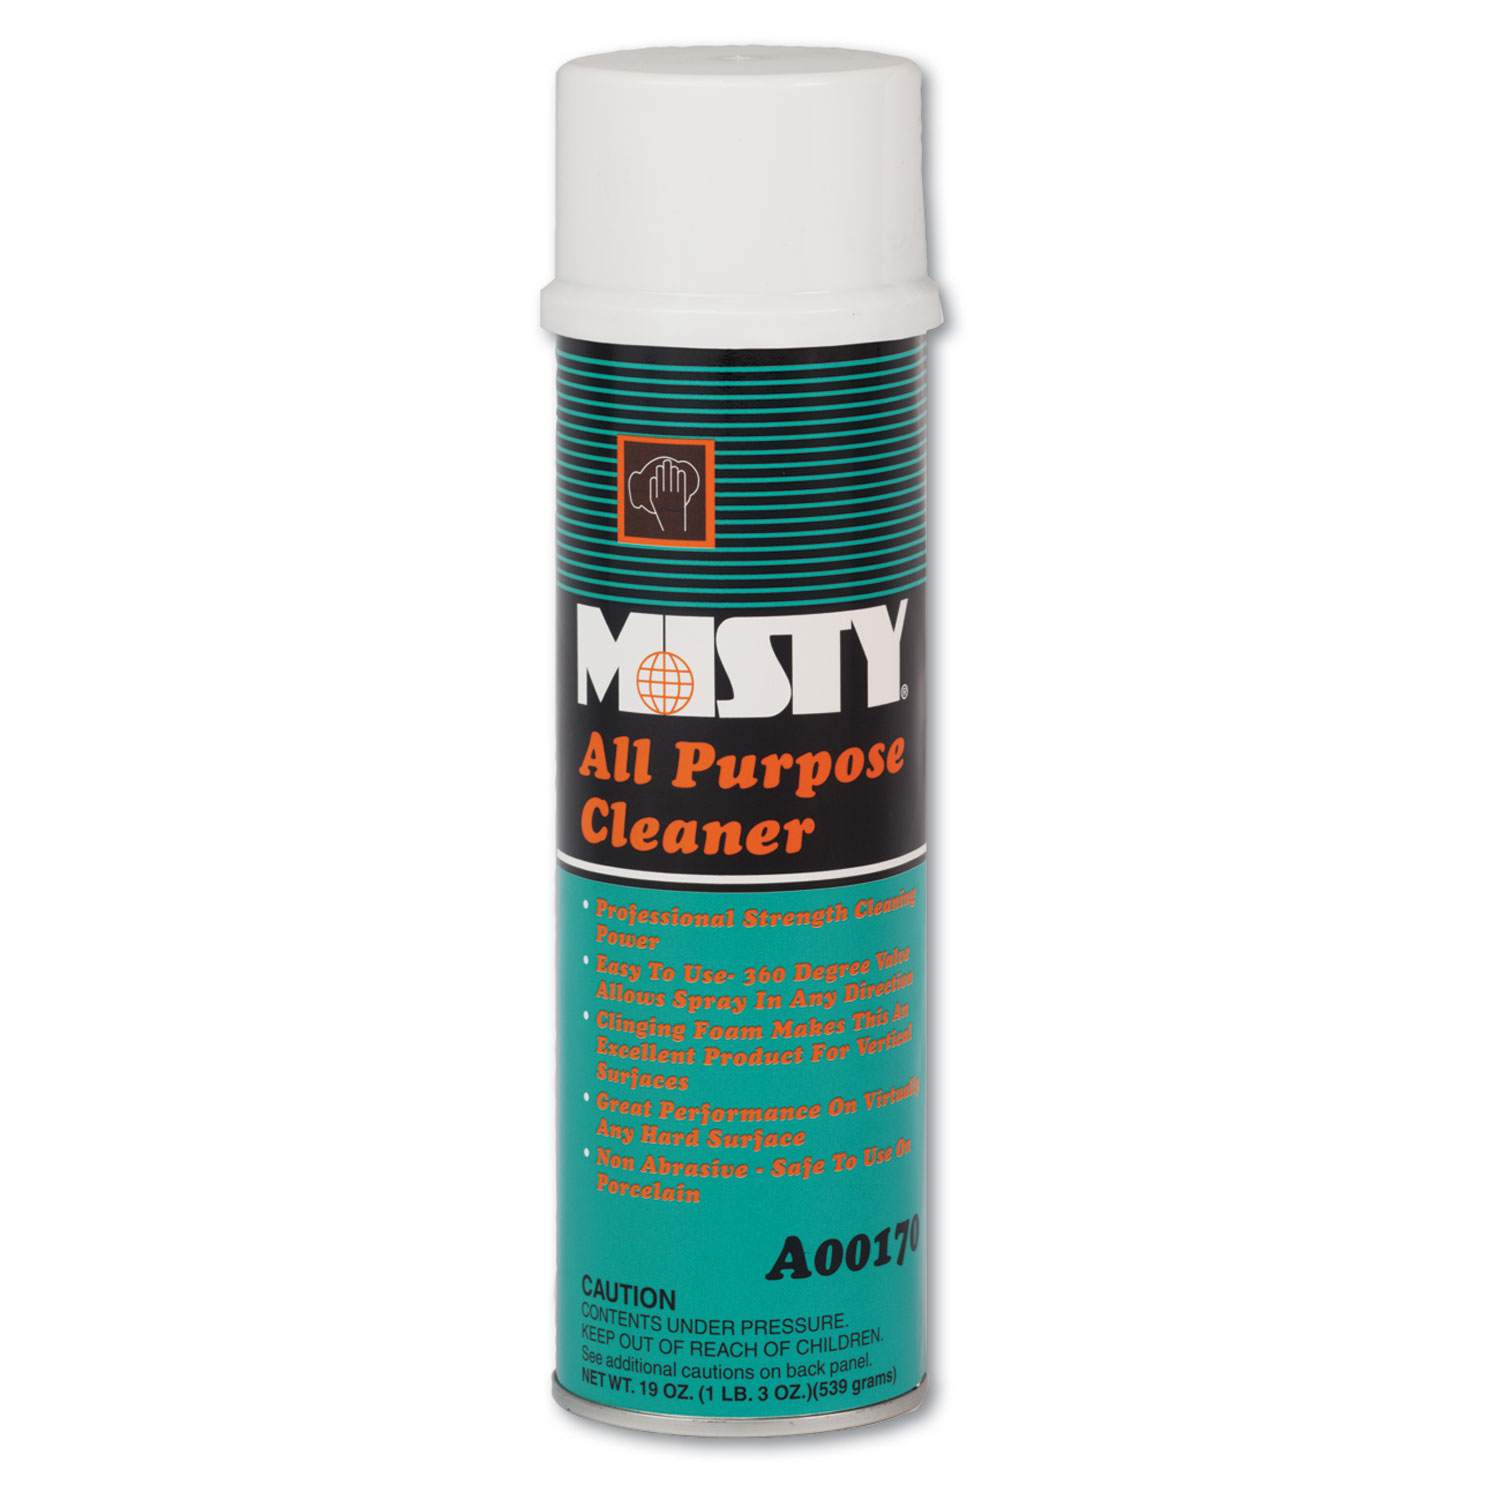 All-Purpose Cleaner, Mint Scent, 19 oz. Aerosol Can